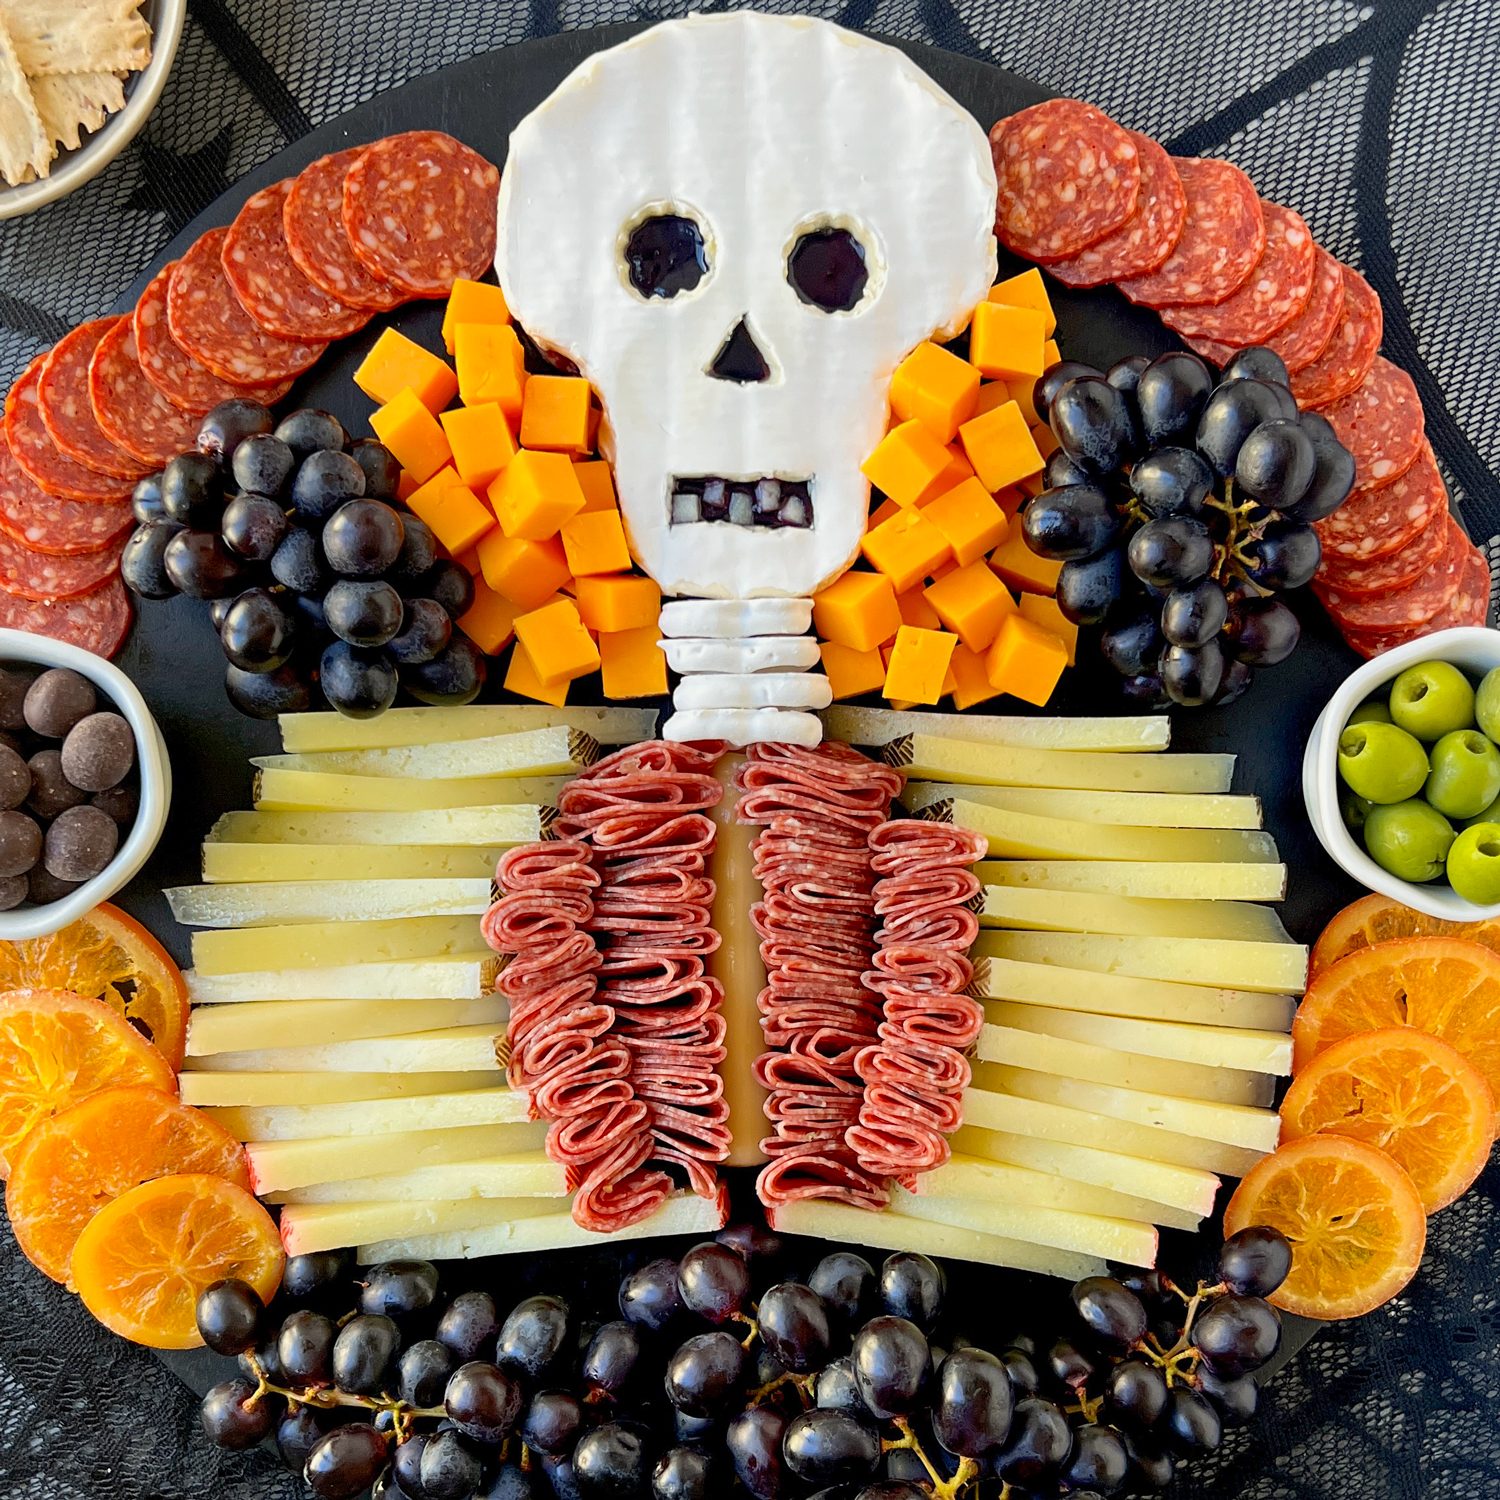 This Skeleton Charcuterie Board Is Halloween Party Goals